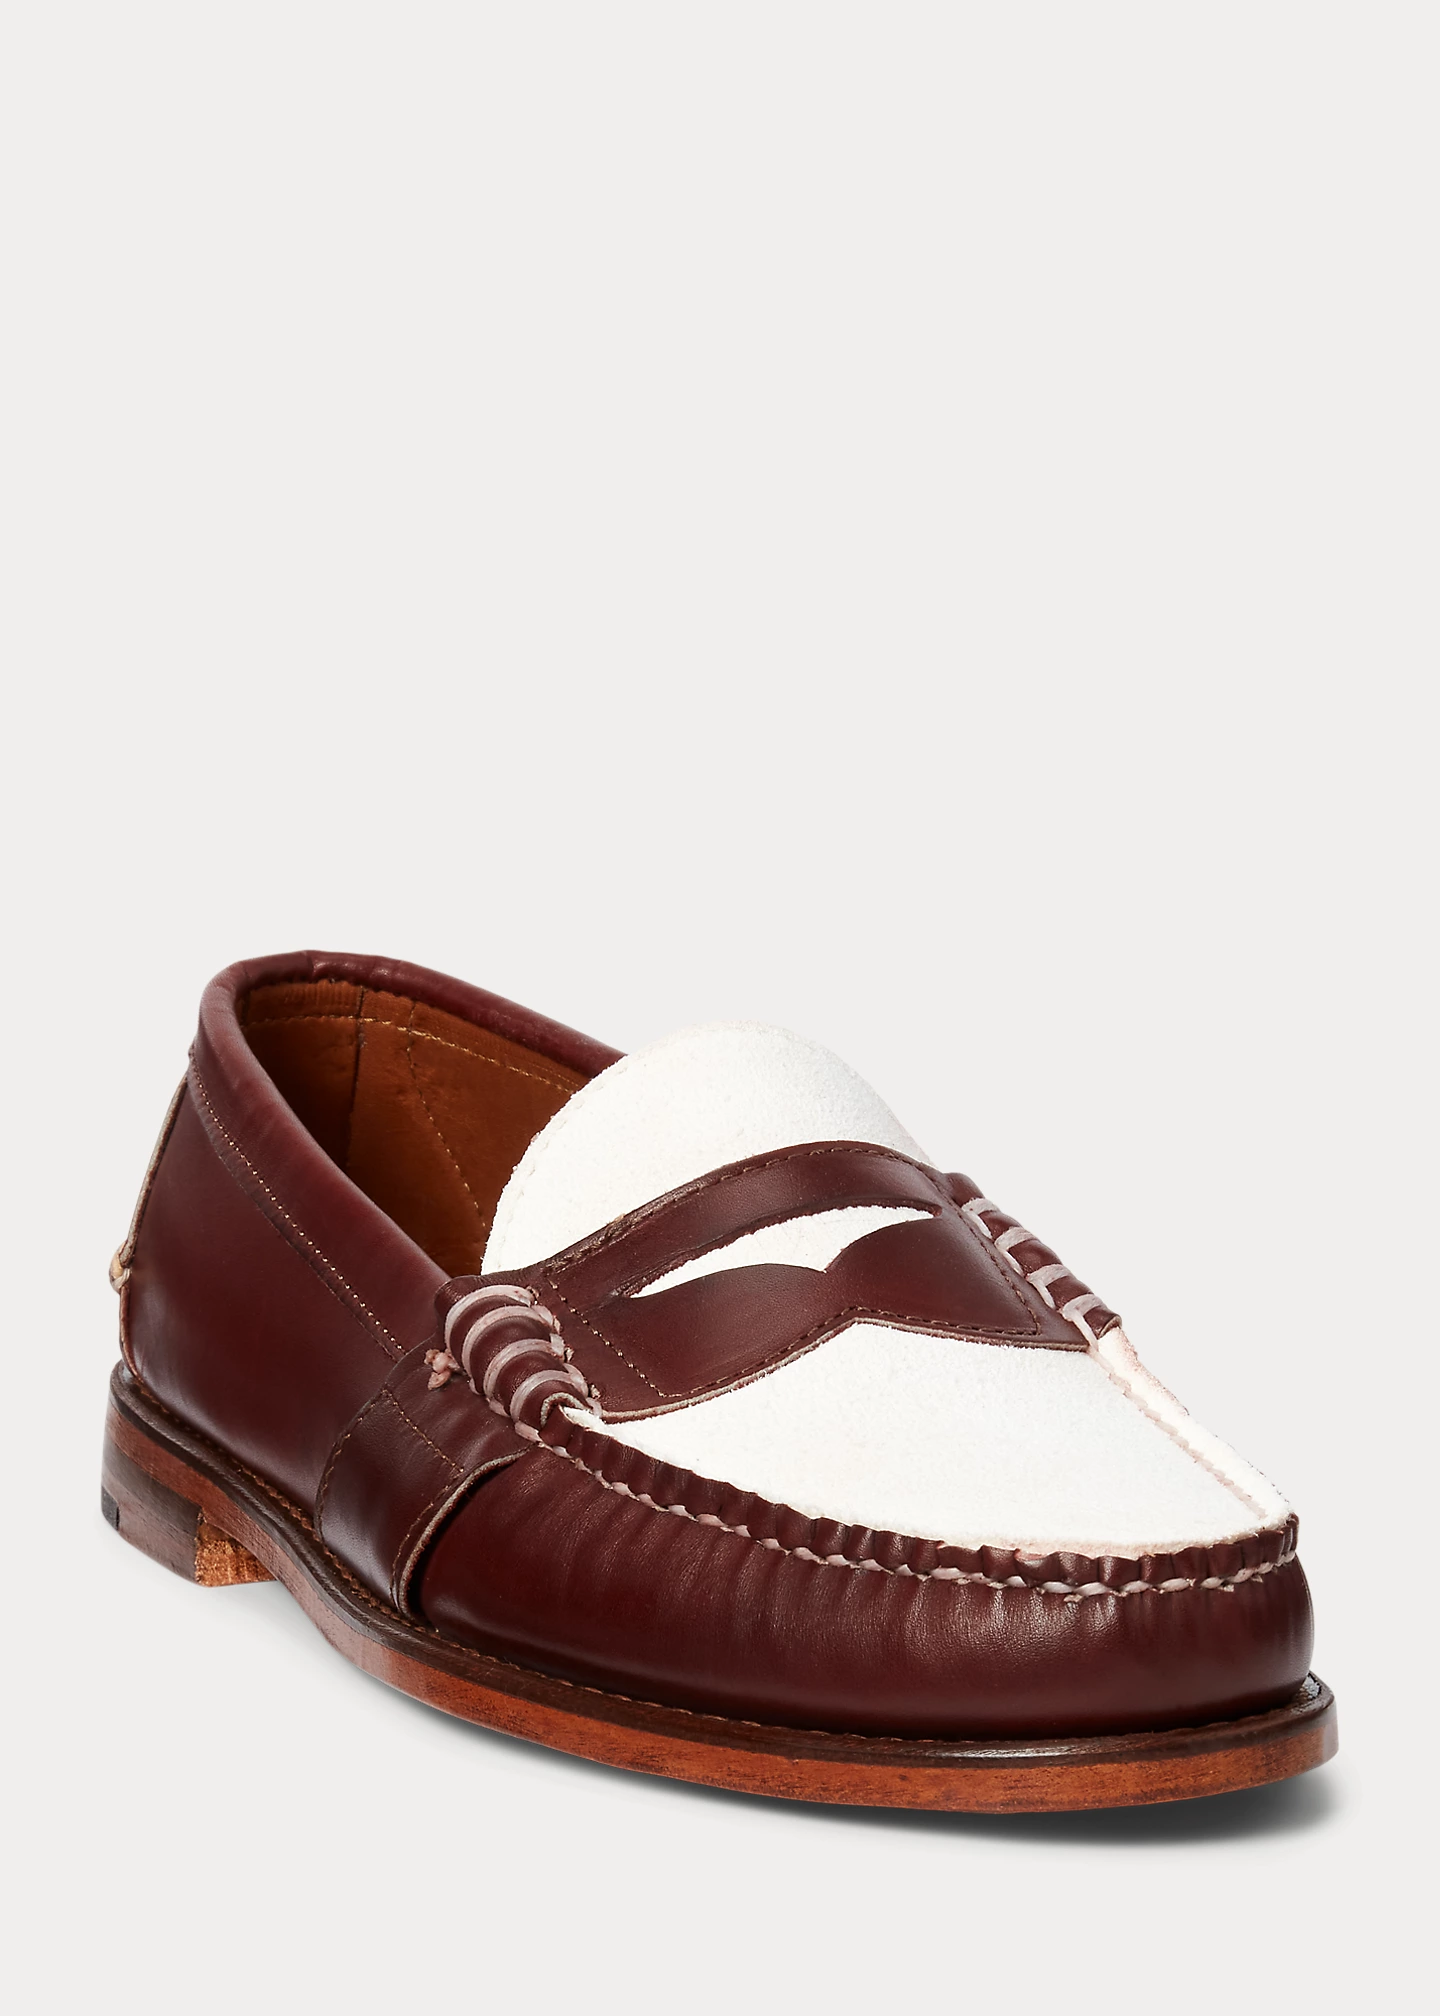 distinctive fashion The Morehouse Collection Penny Loafer-,$39.50